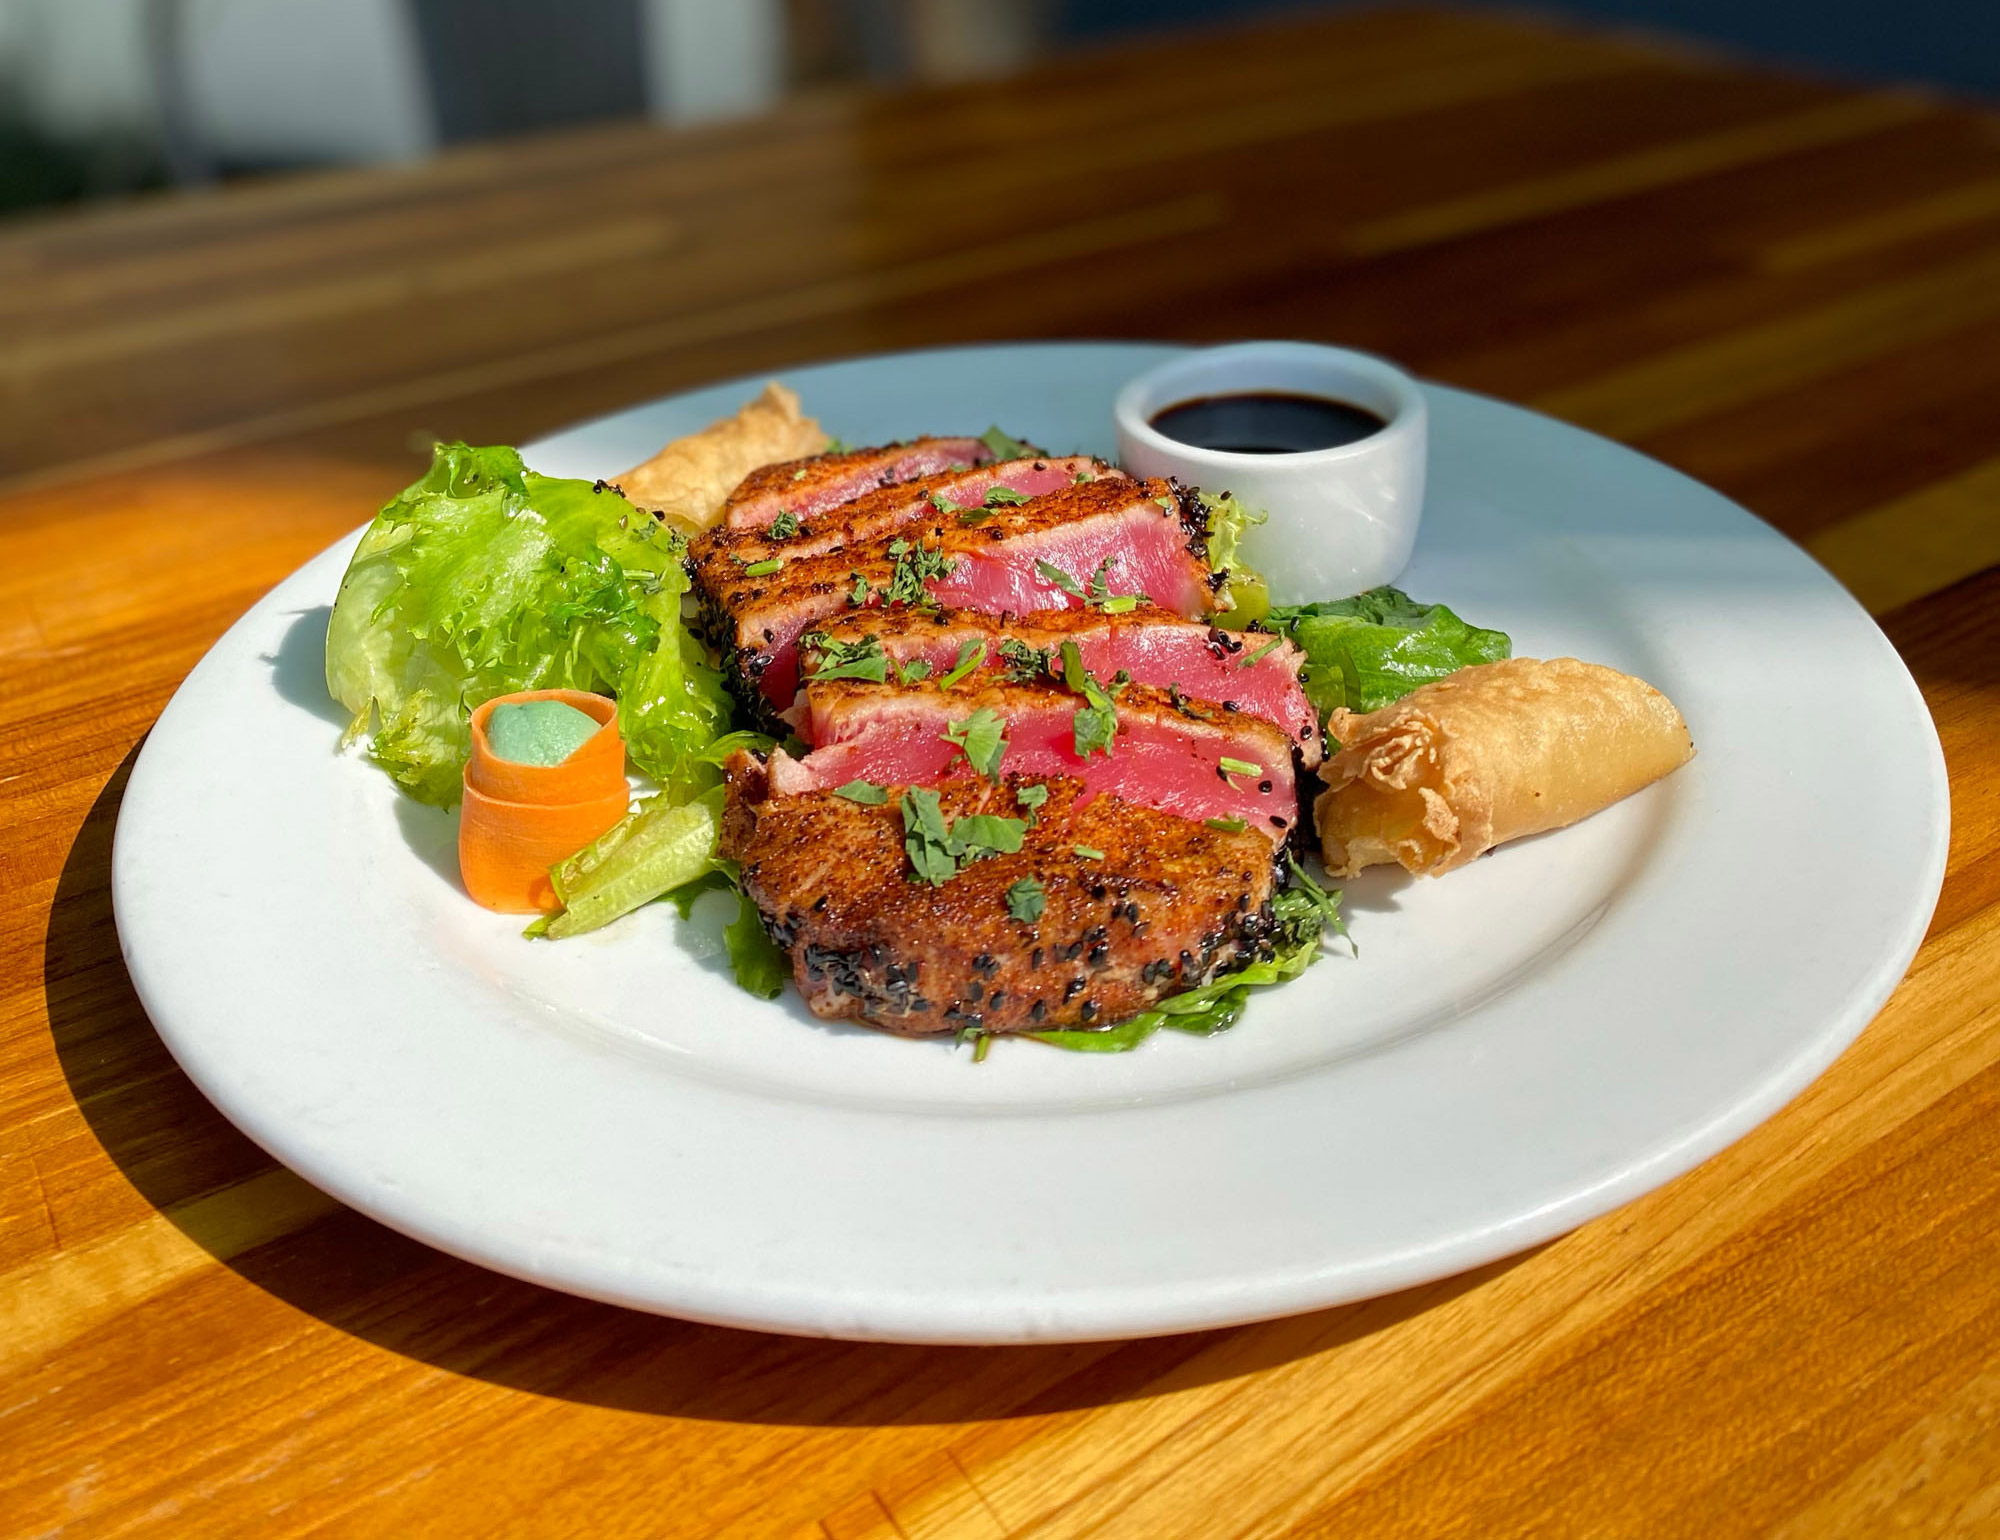 Seared ahi tuna, a spring roll, and TrueHarvest Crispy Leaf sit on a white plate on a wooden table.